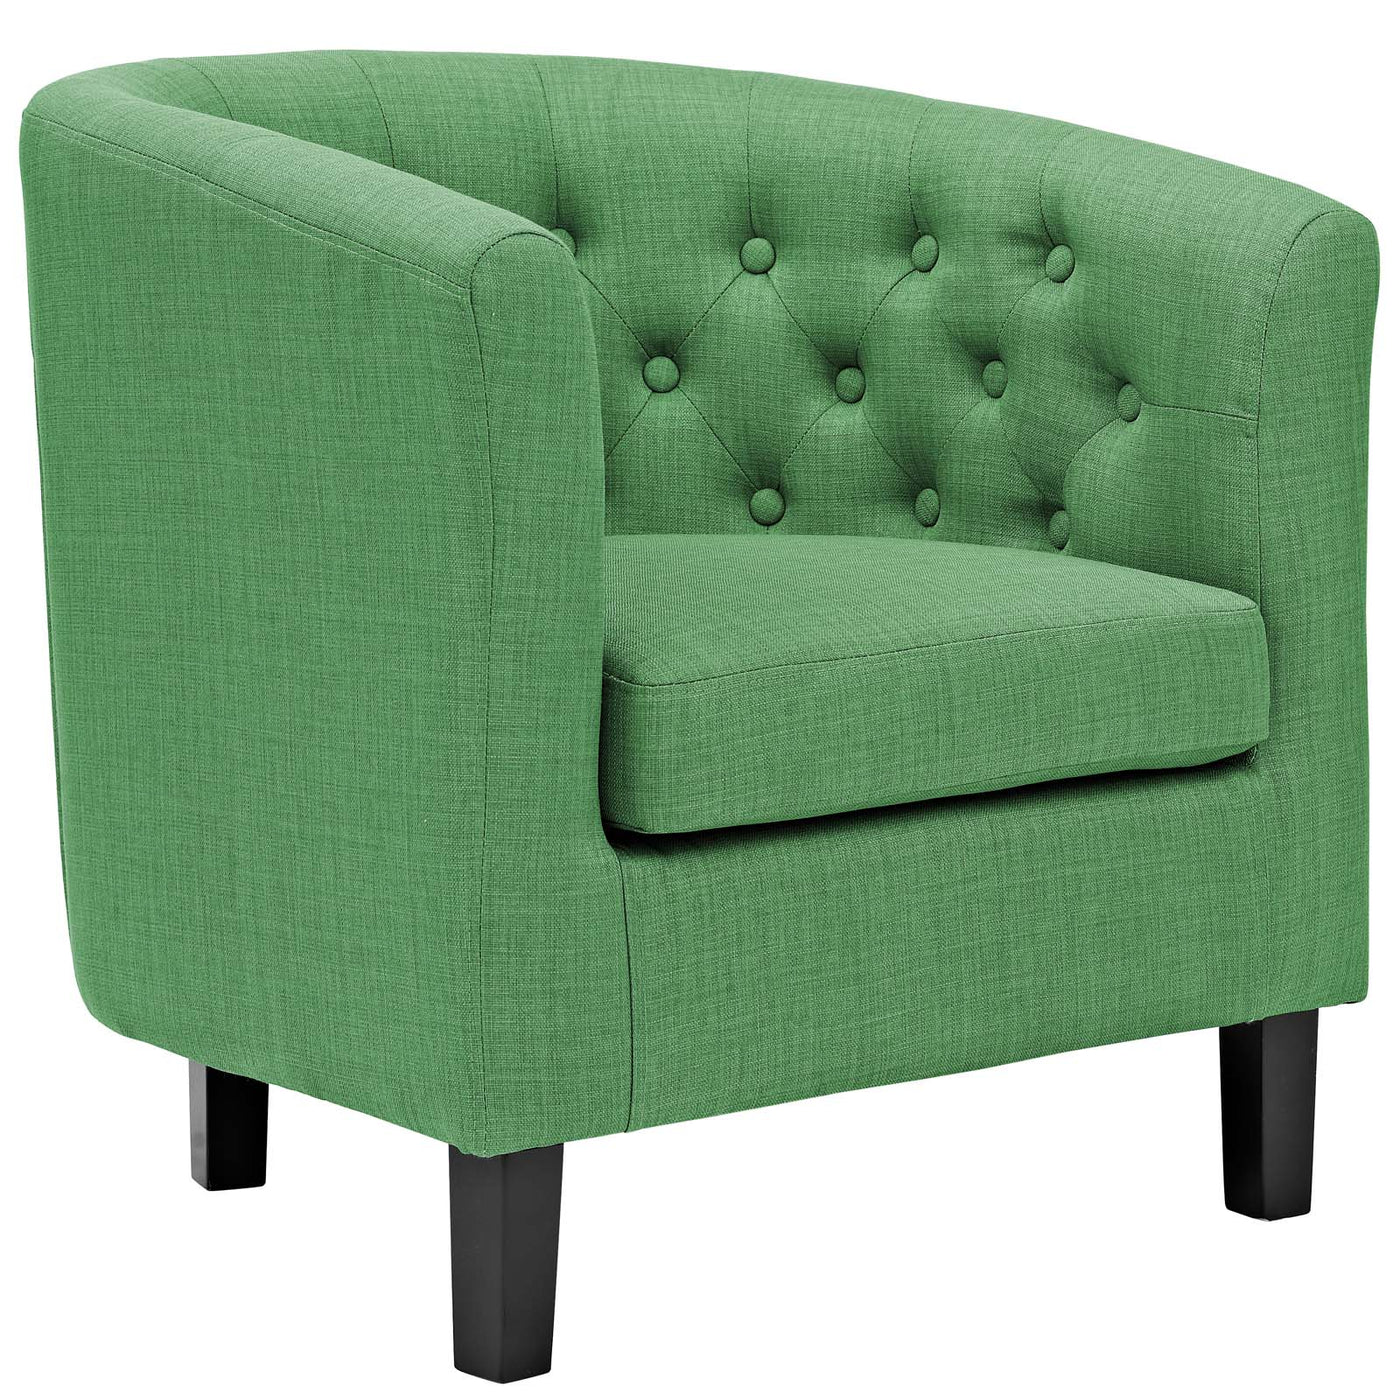 Prospect Upholstered Fabric Armchair